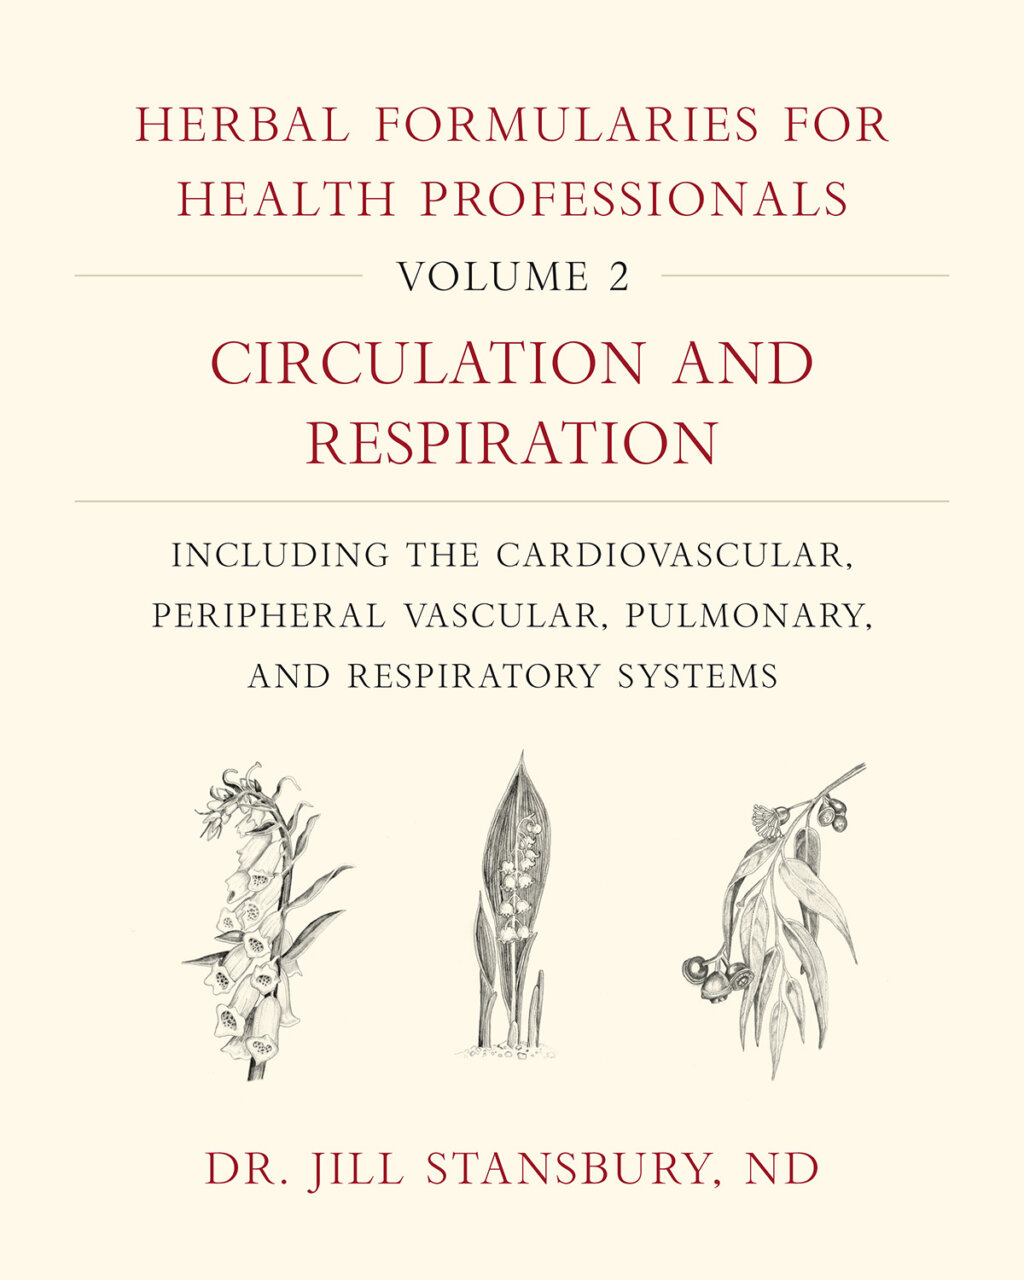 Herbal Formularies for Health Professionals, Volume 2:  Circulation and Respiration